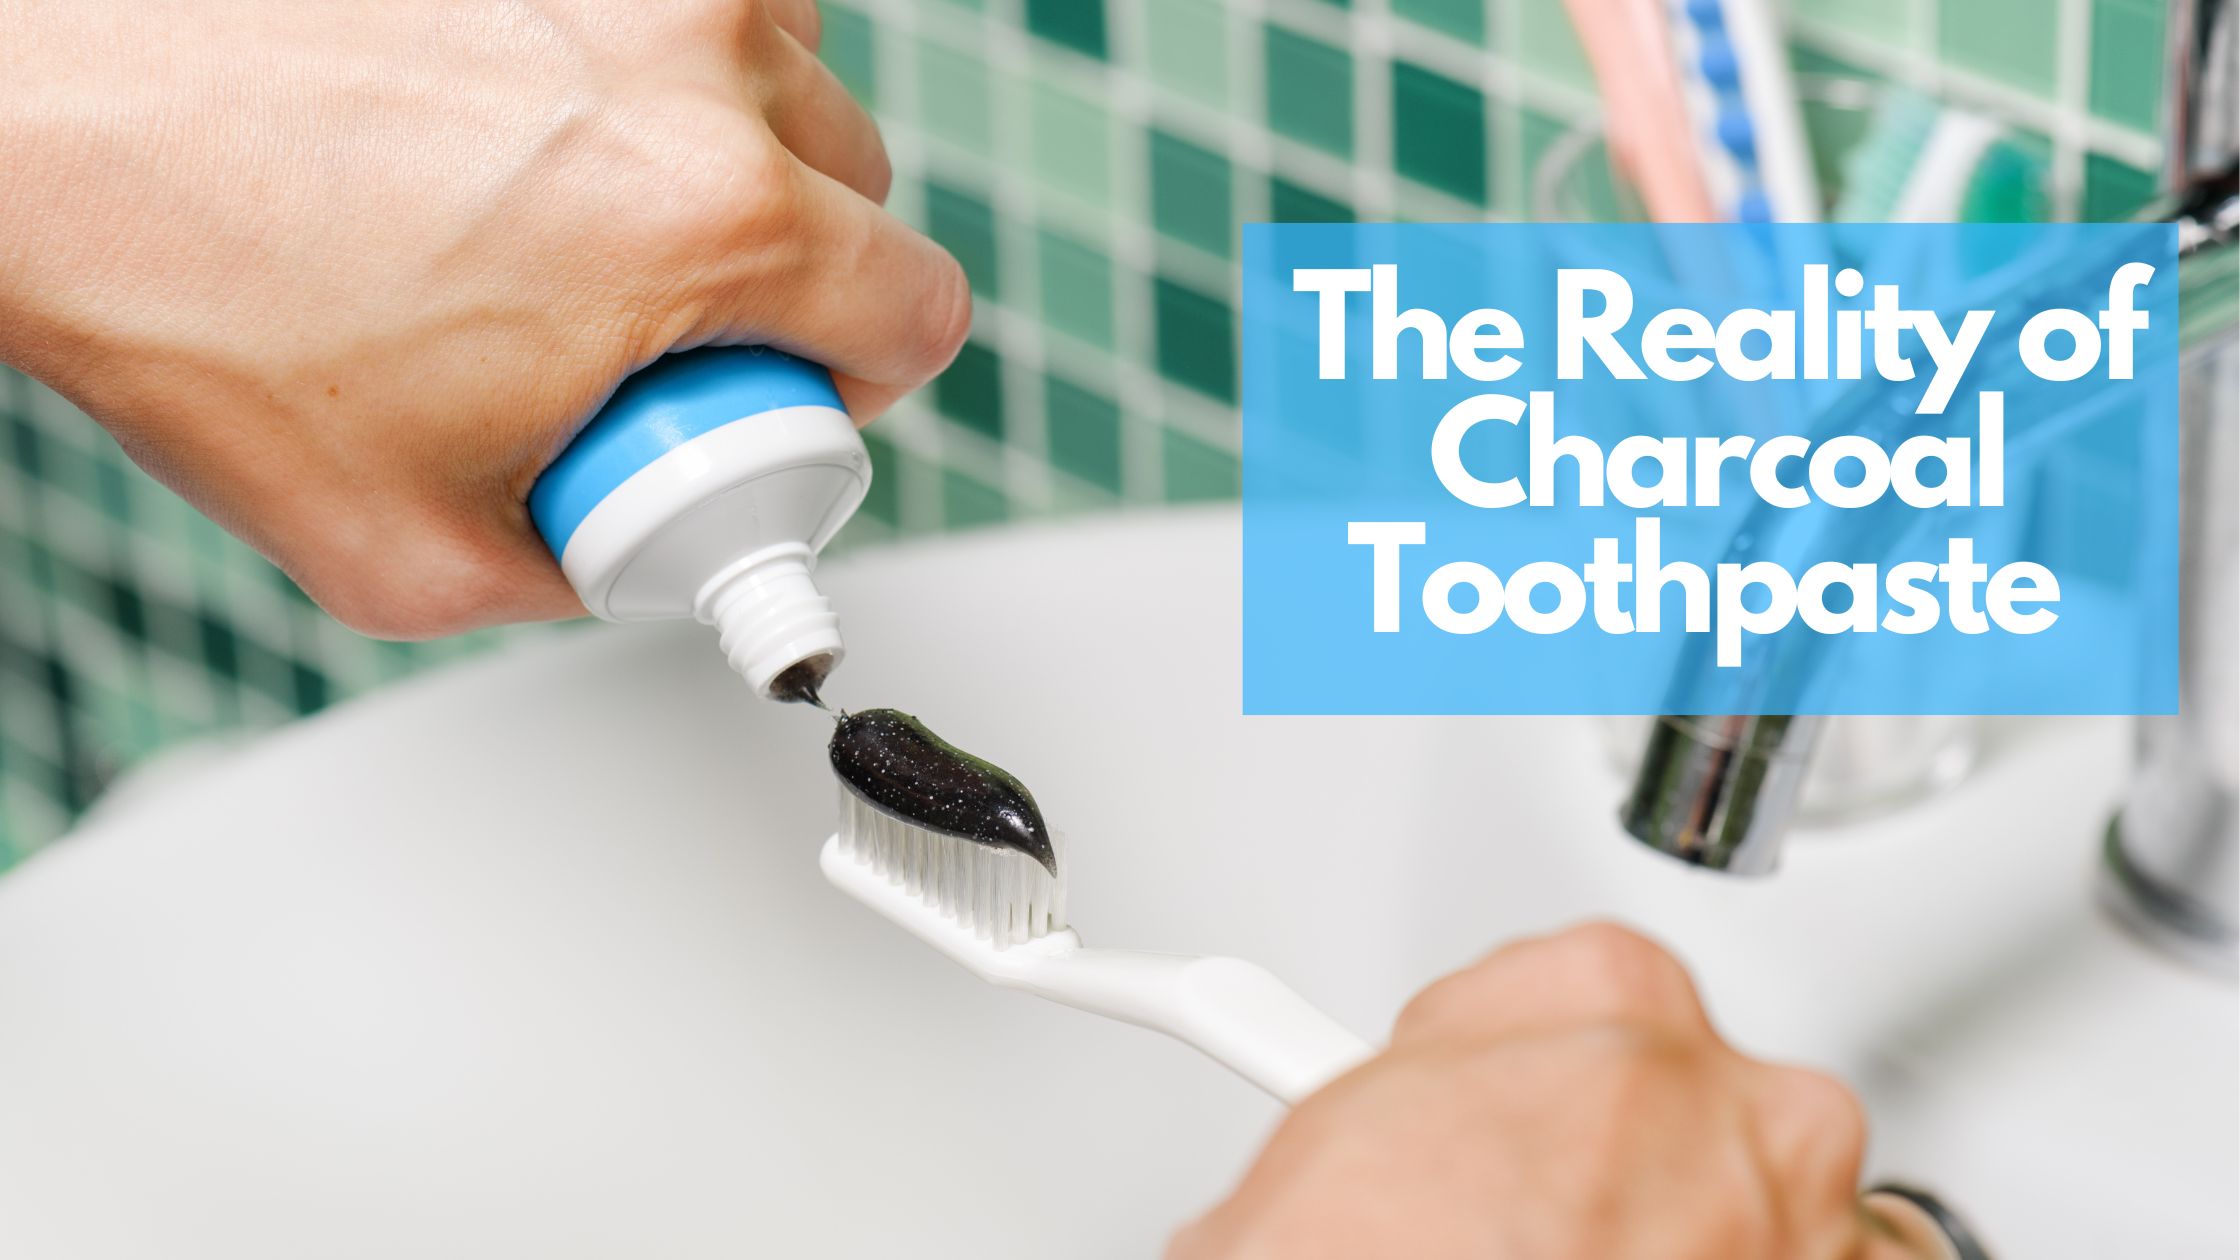 The Reality of Charcoal Toothpaste